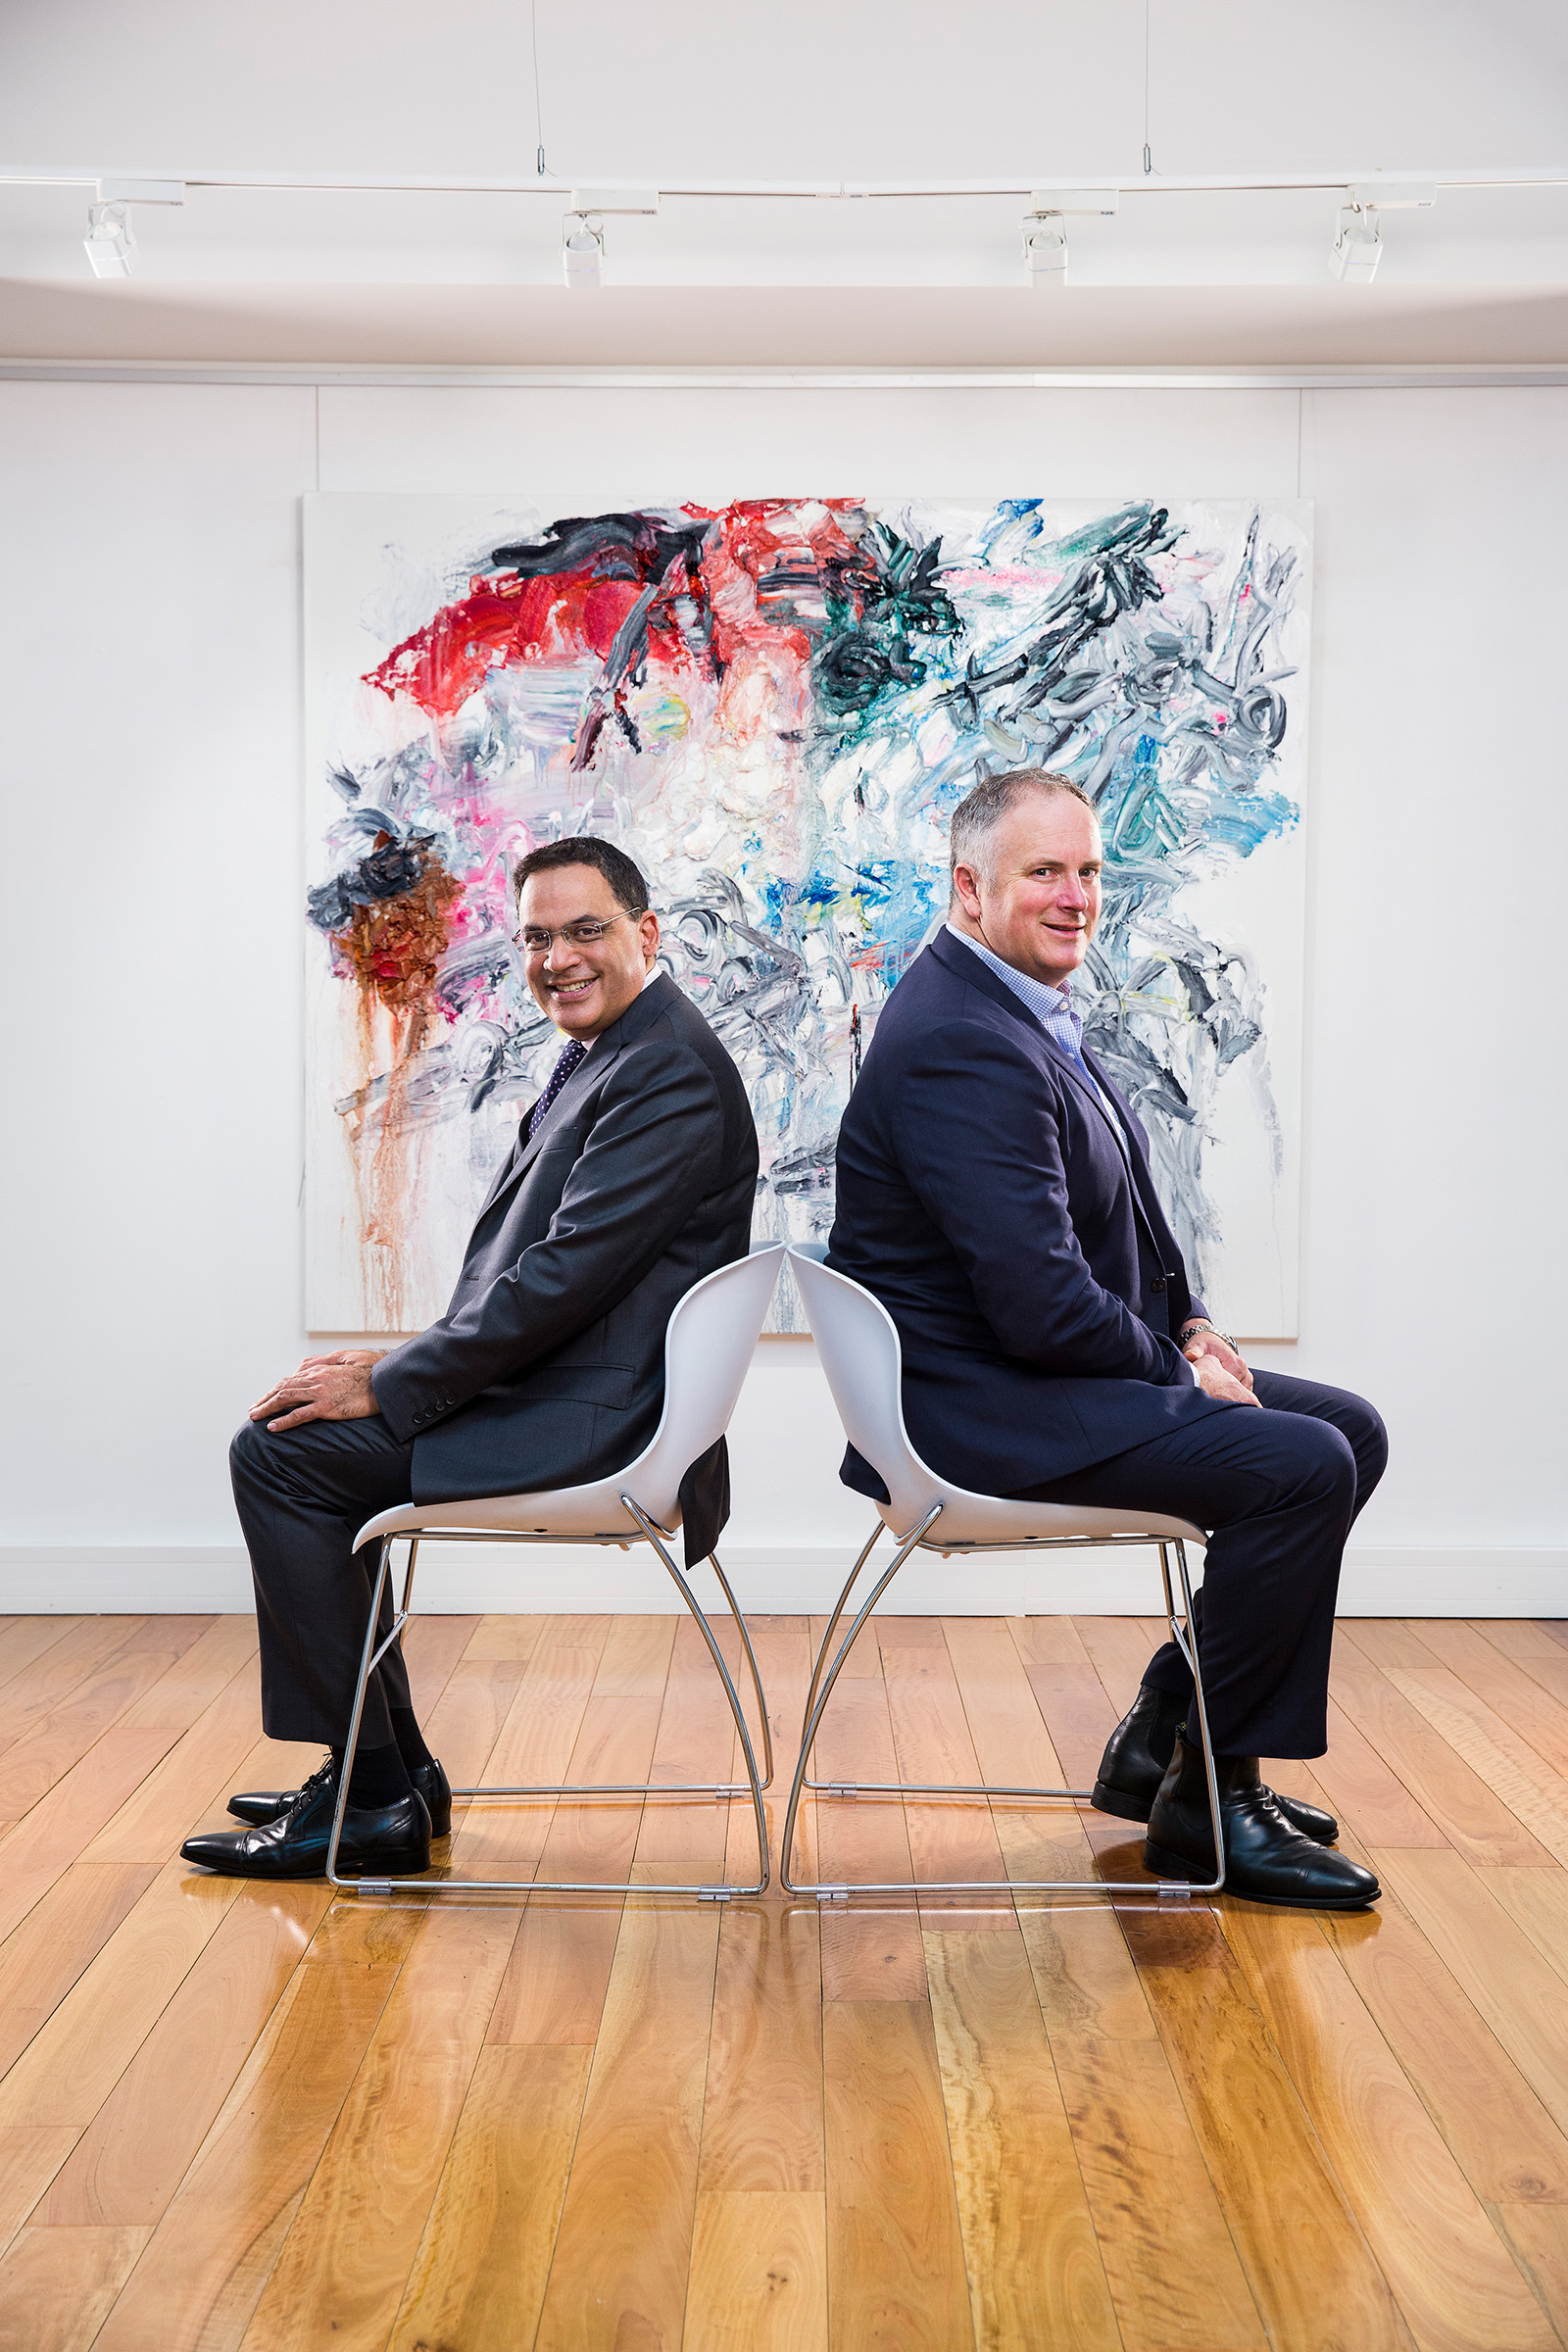 Corporate editorial photography of 2 seated men on white chairs in art gallery with painting in background